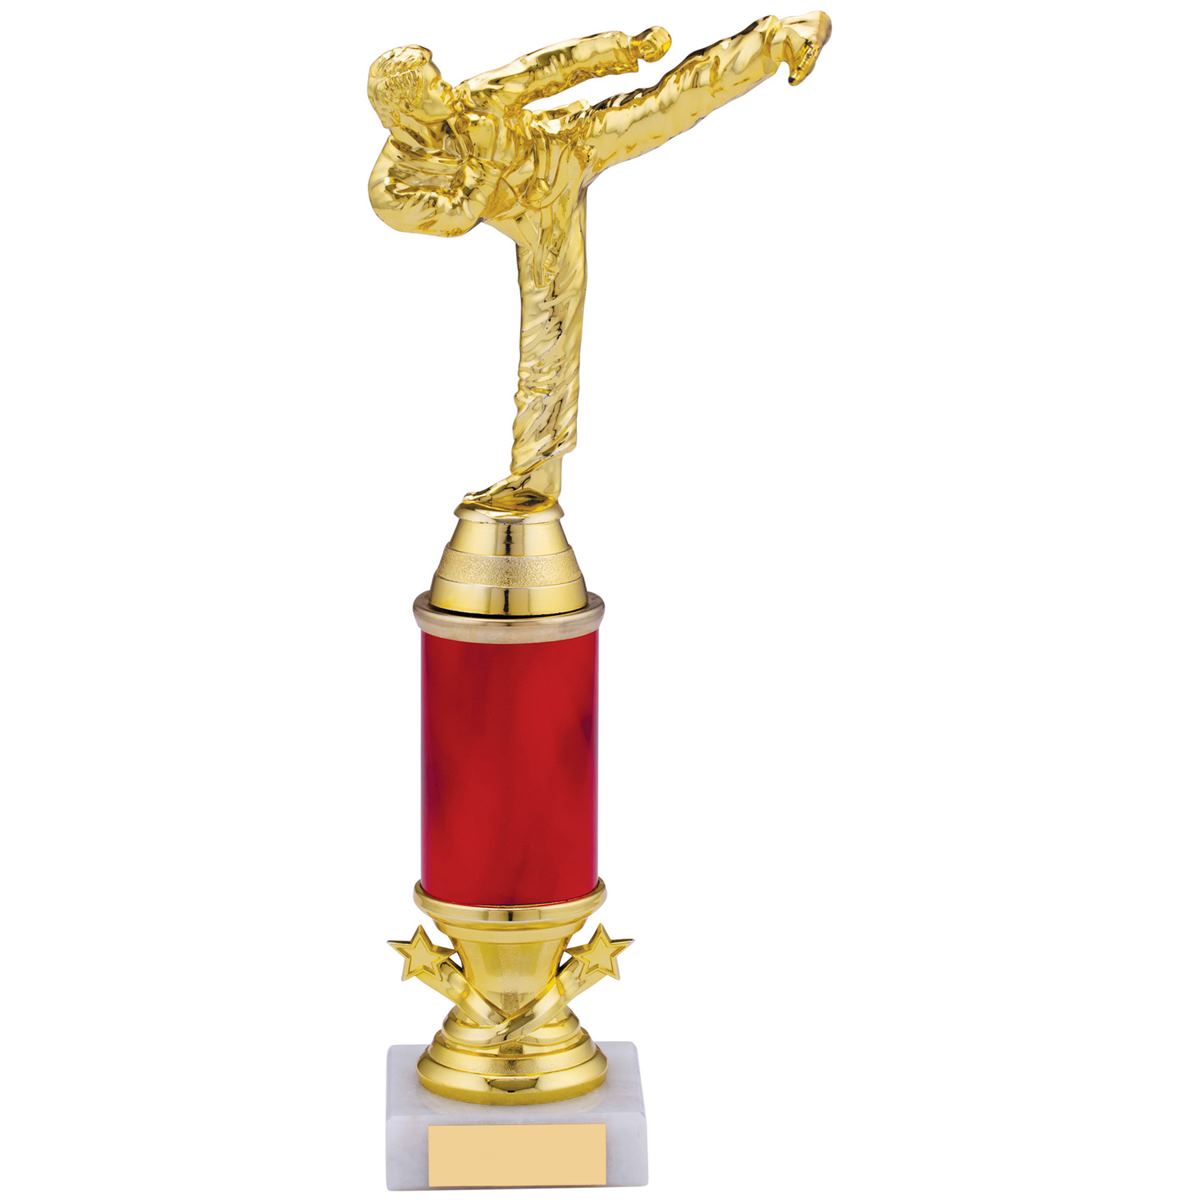 Karate Mini Tower Trophy Gold and Red Tube Award